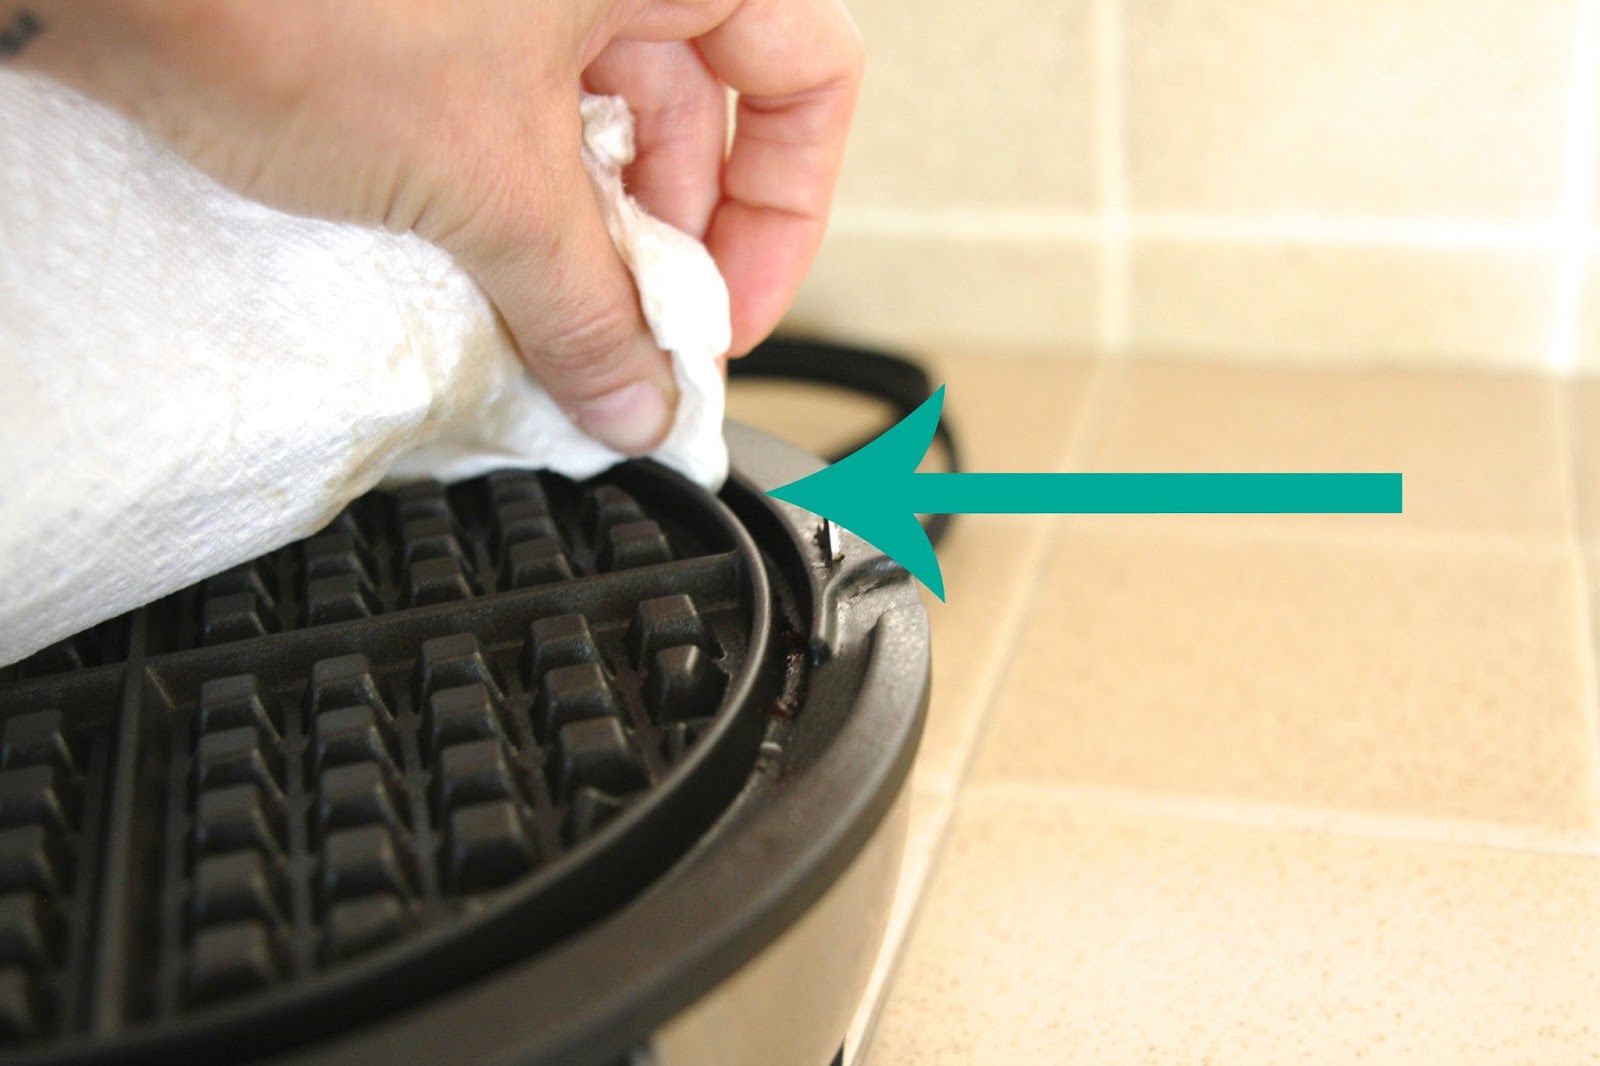 How to Clean a Waffle Maker, Plus More Waffle FAQs